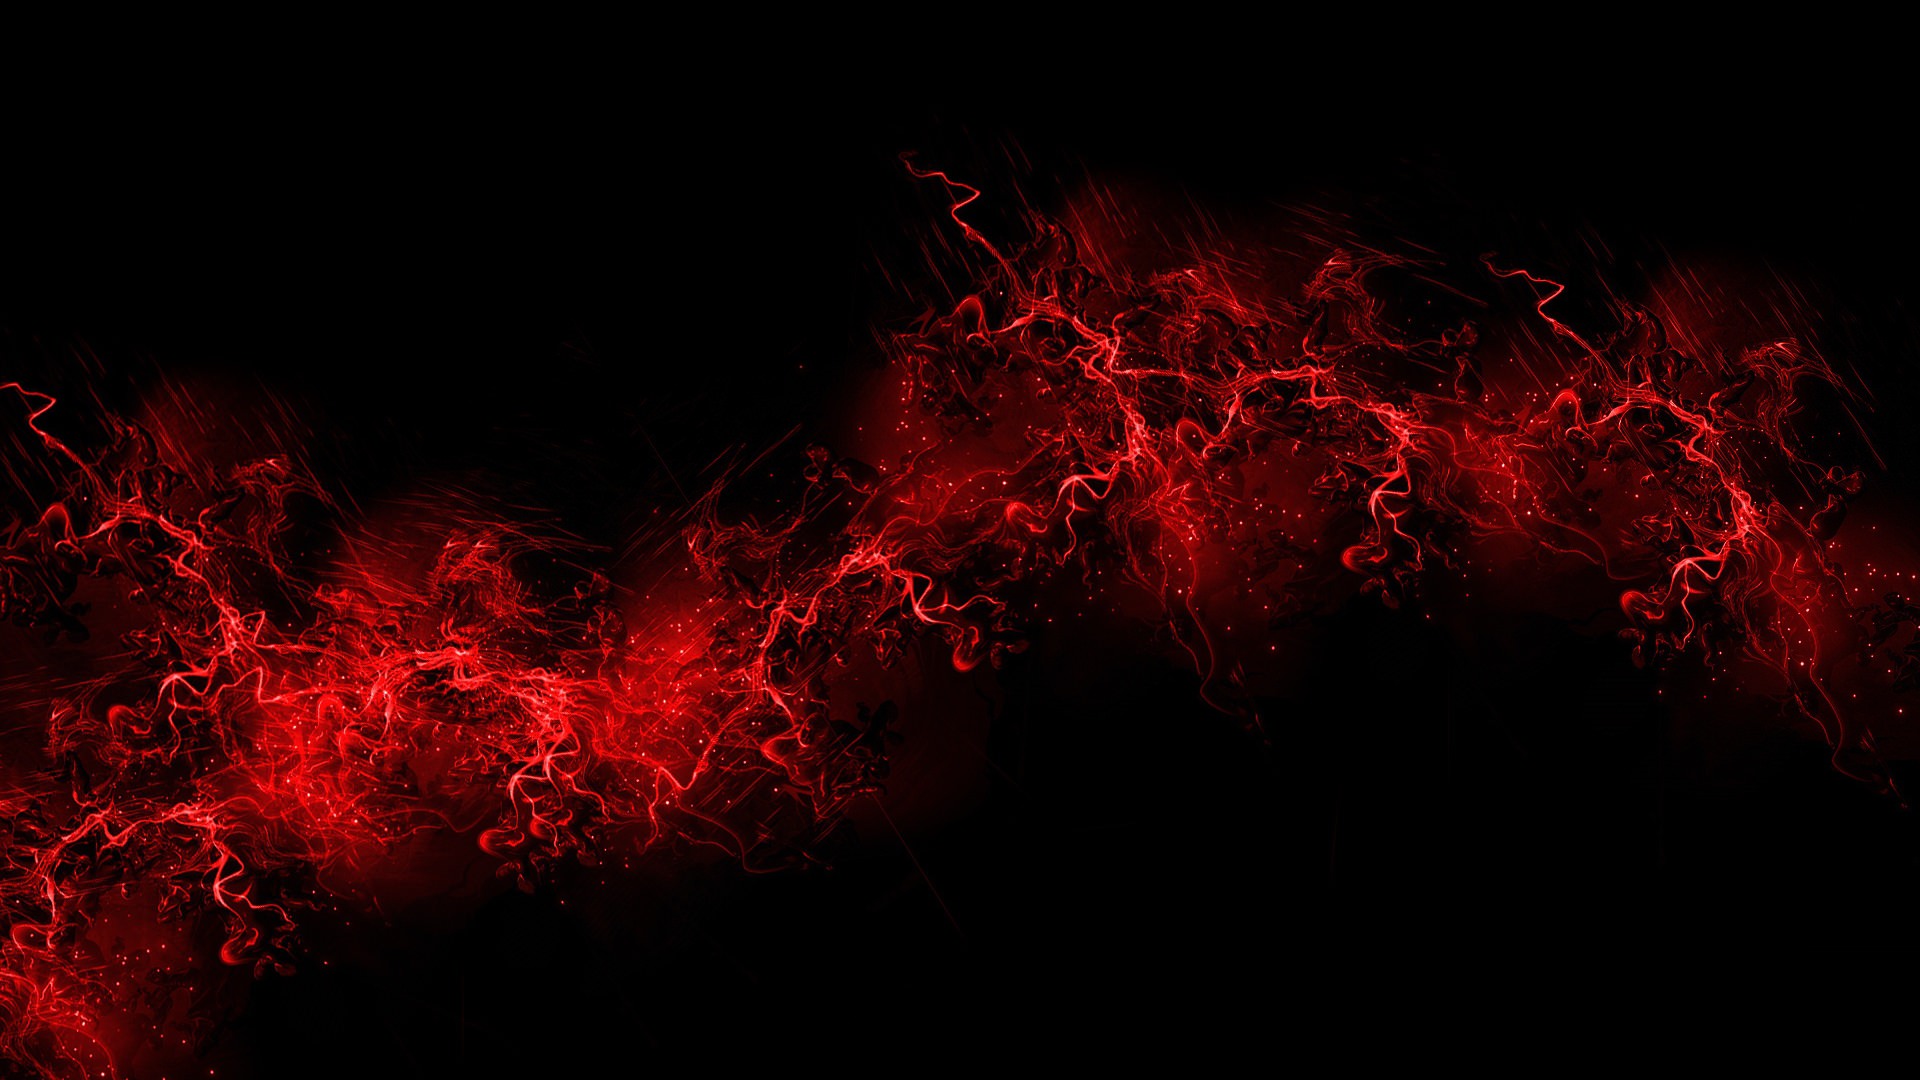 Abstract Black & Red Wallpaper